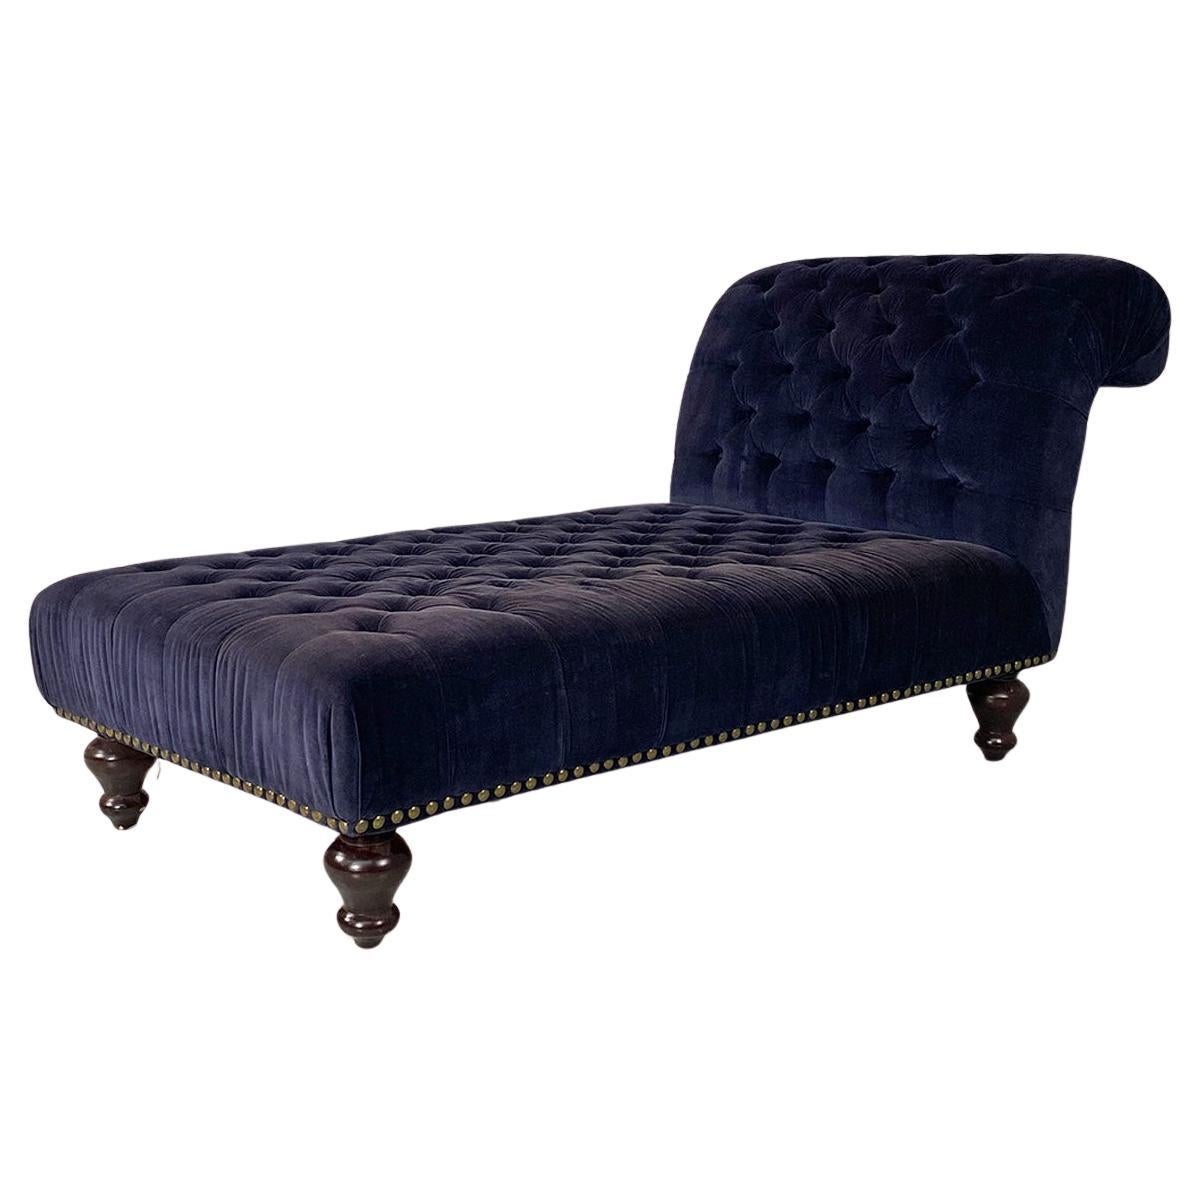 Italian antique style blue velvet and wood dormeuse or chaise longue, 1980s For Sale